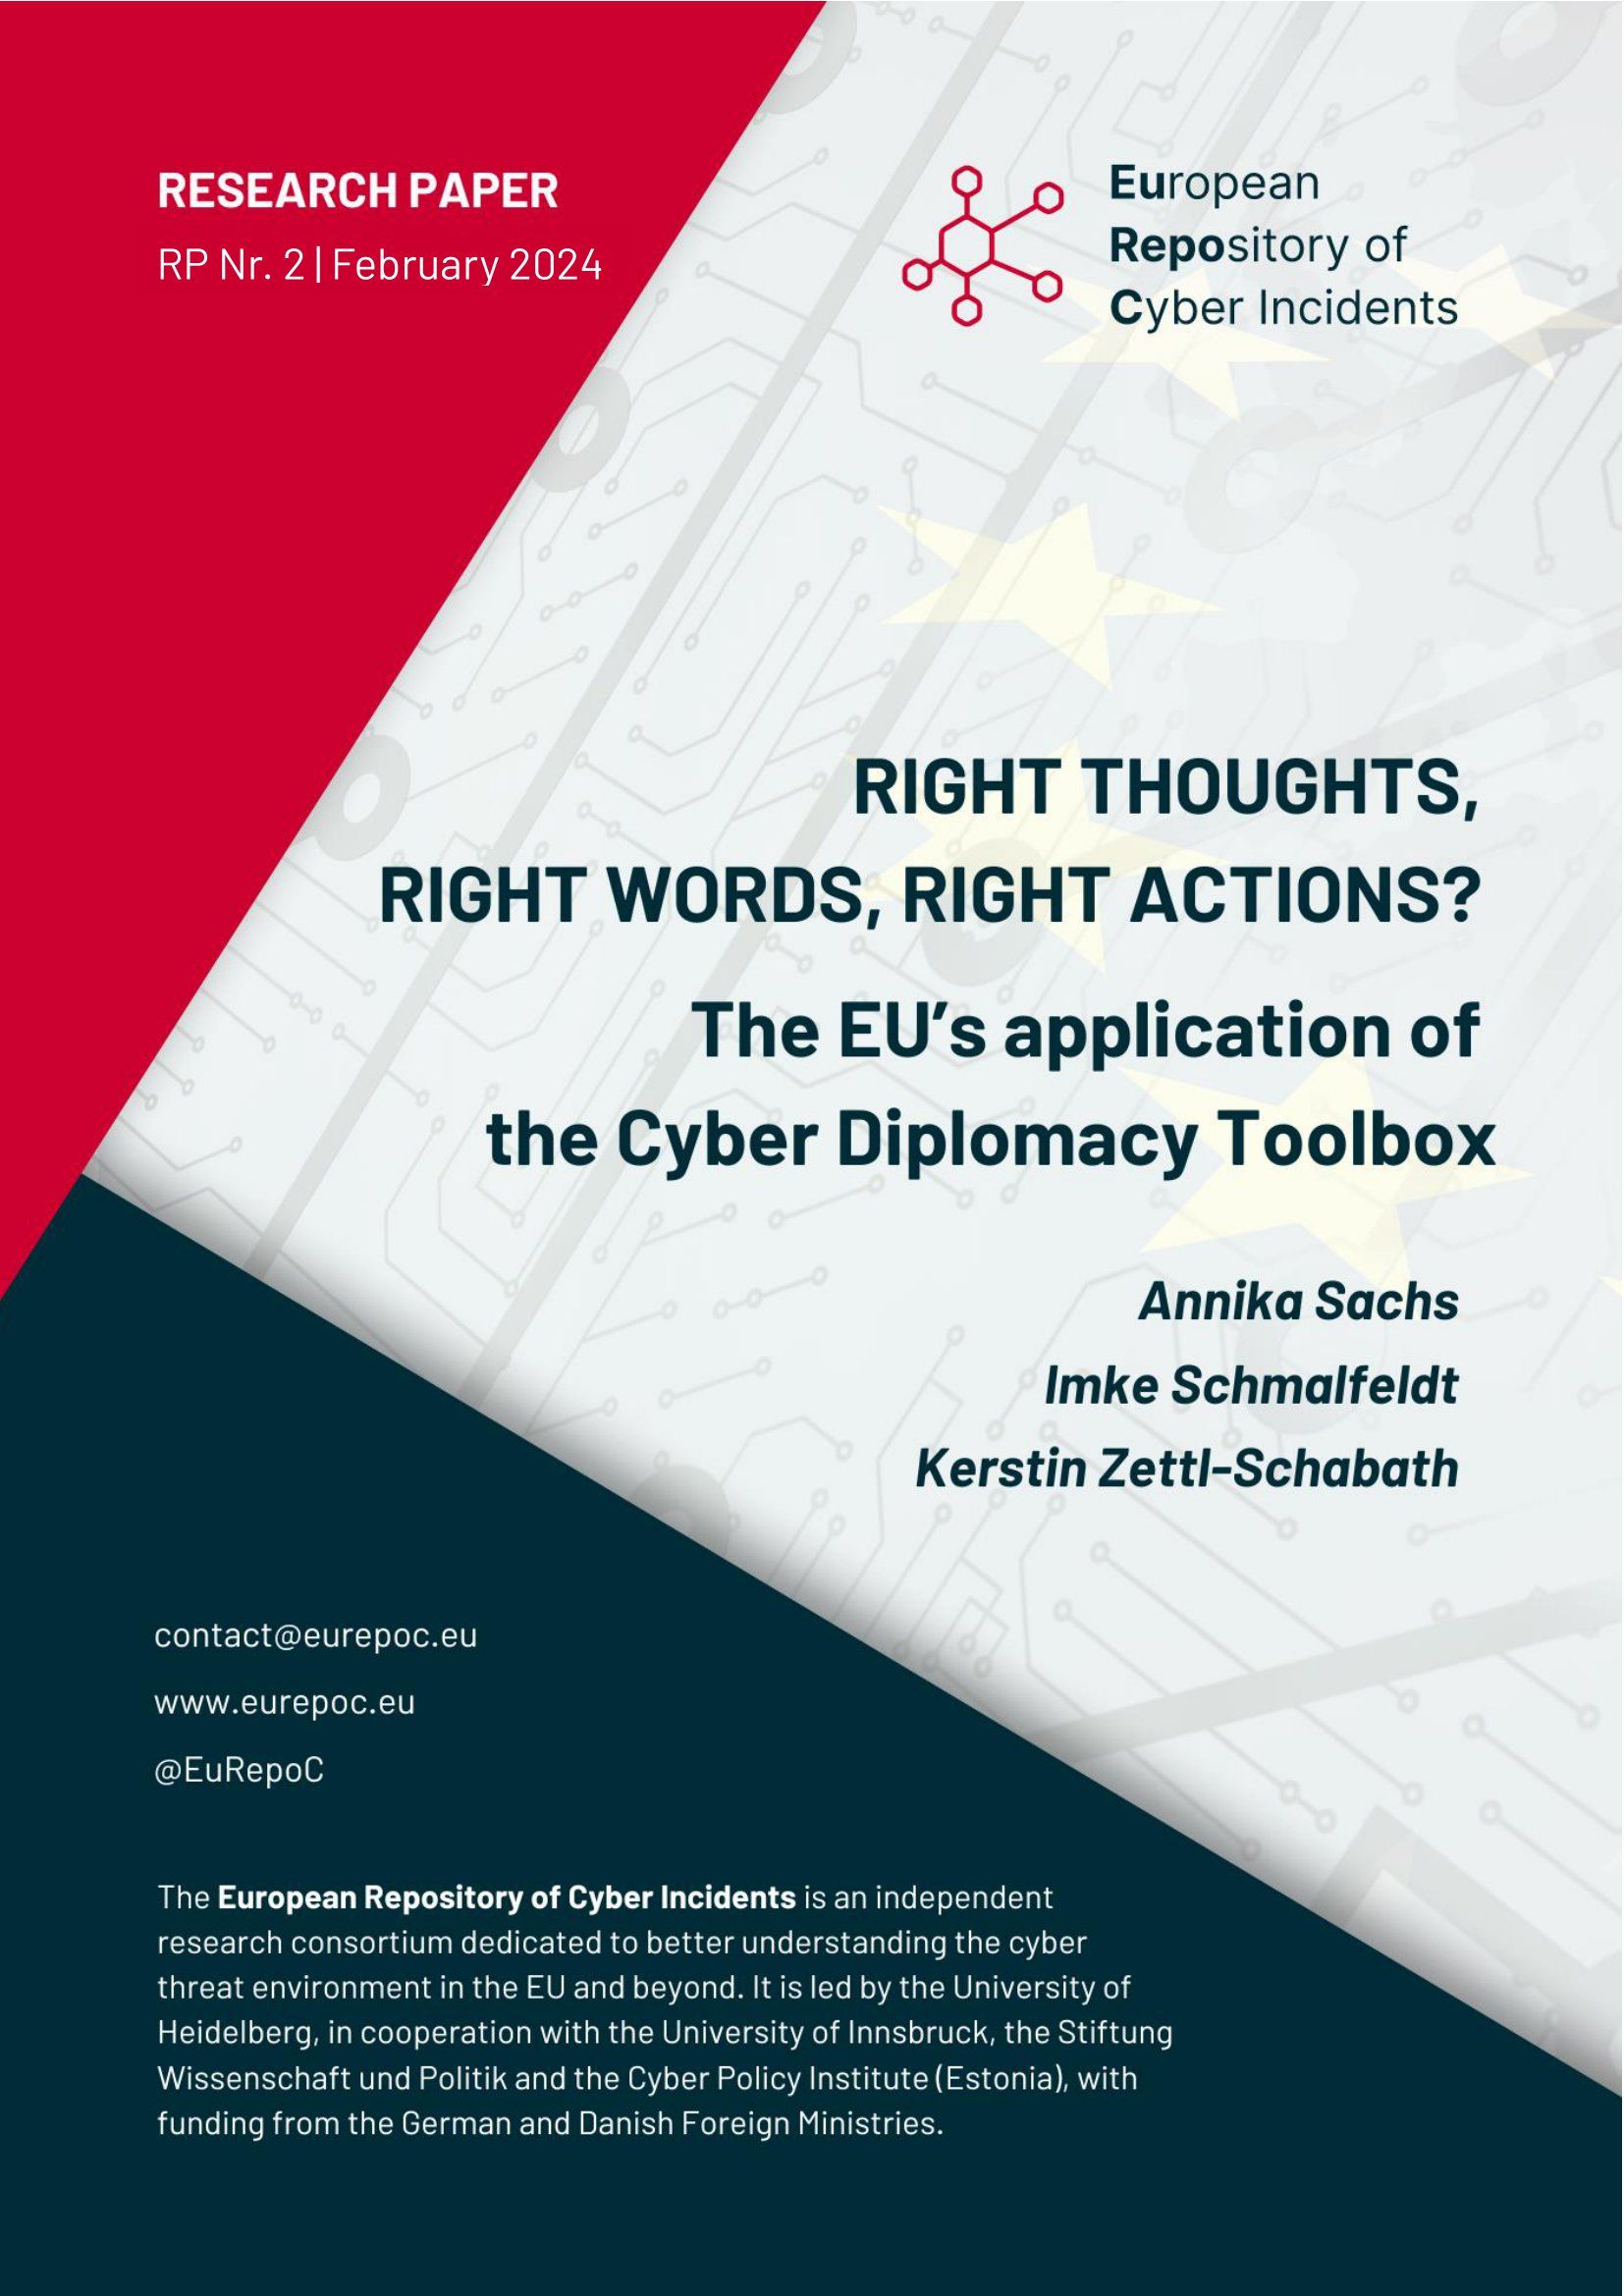 Right Thoughts, Right Words, Right Actions?: The EU’s Application of the Cyber Diplomacy Toolbox